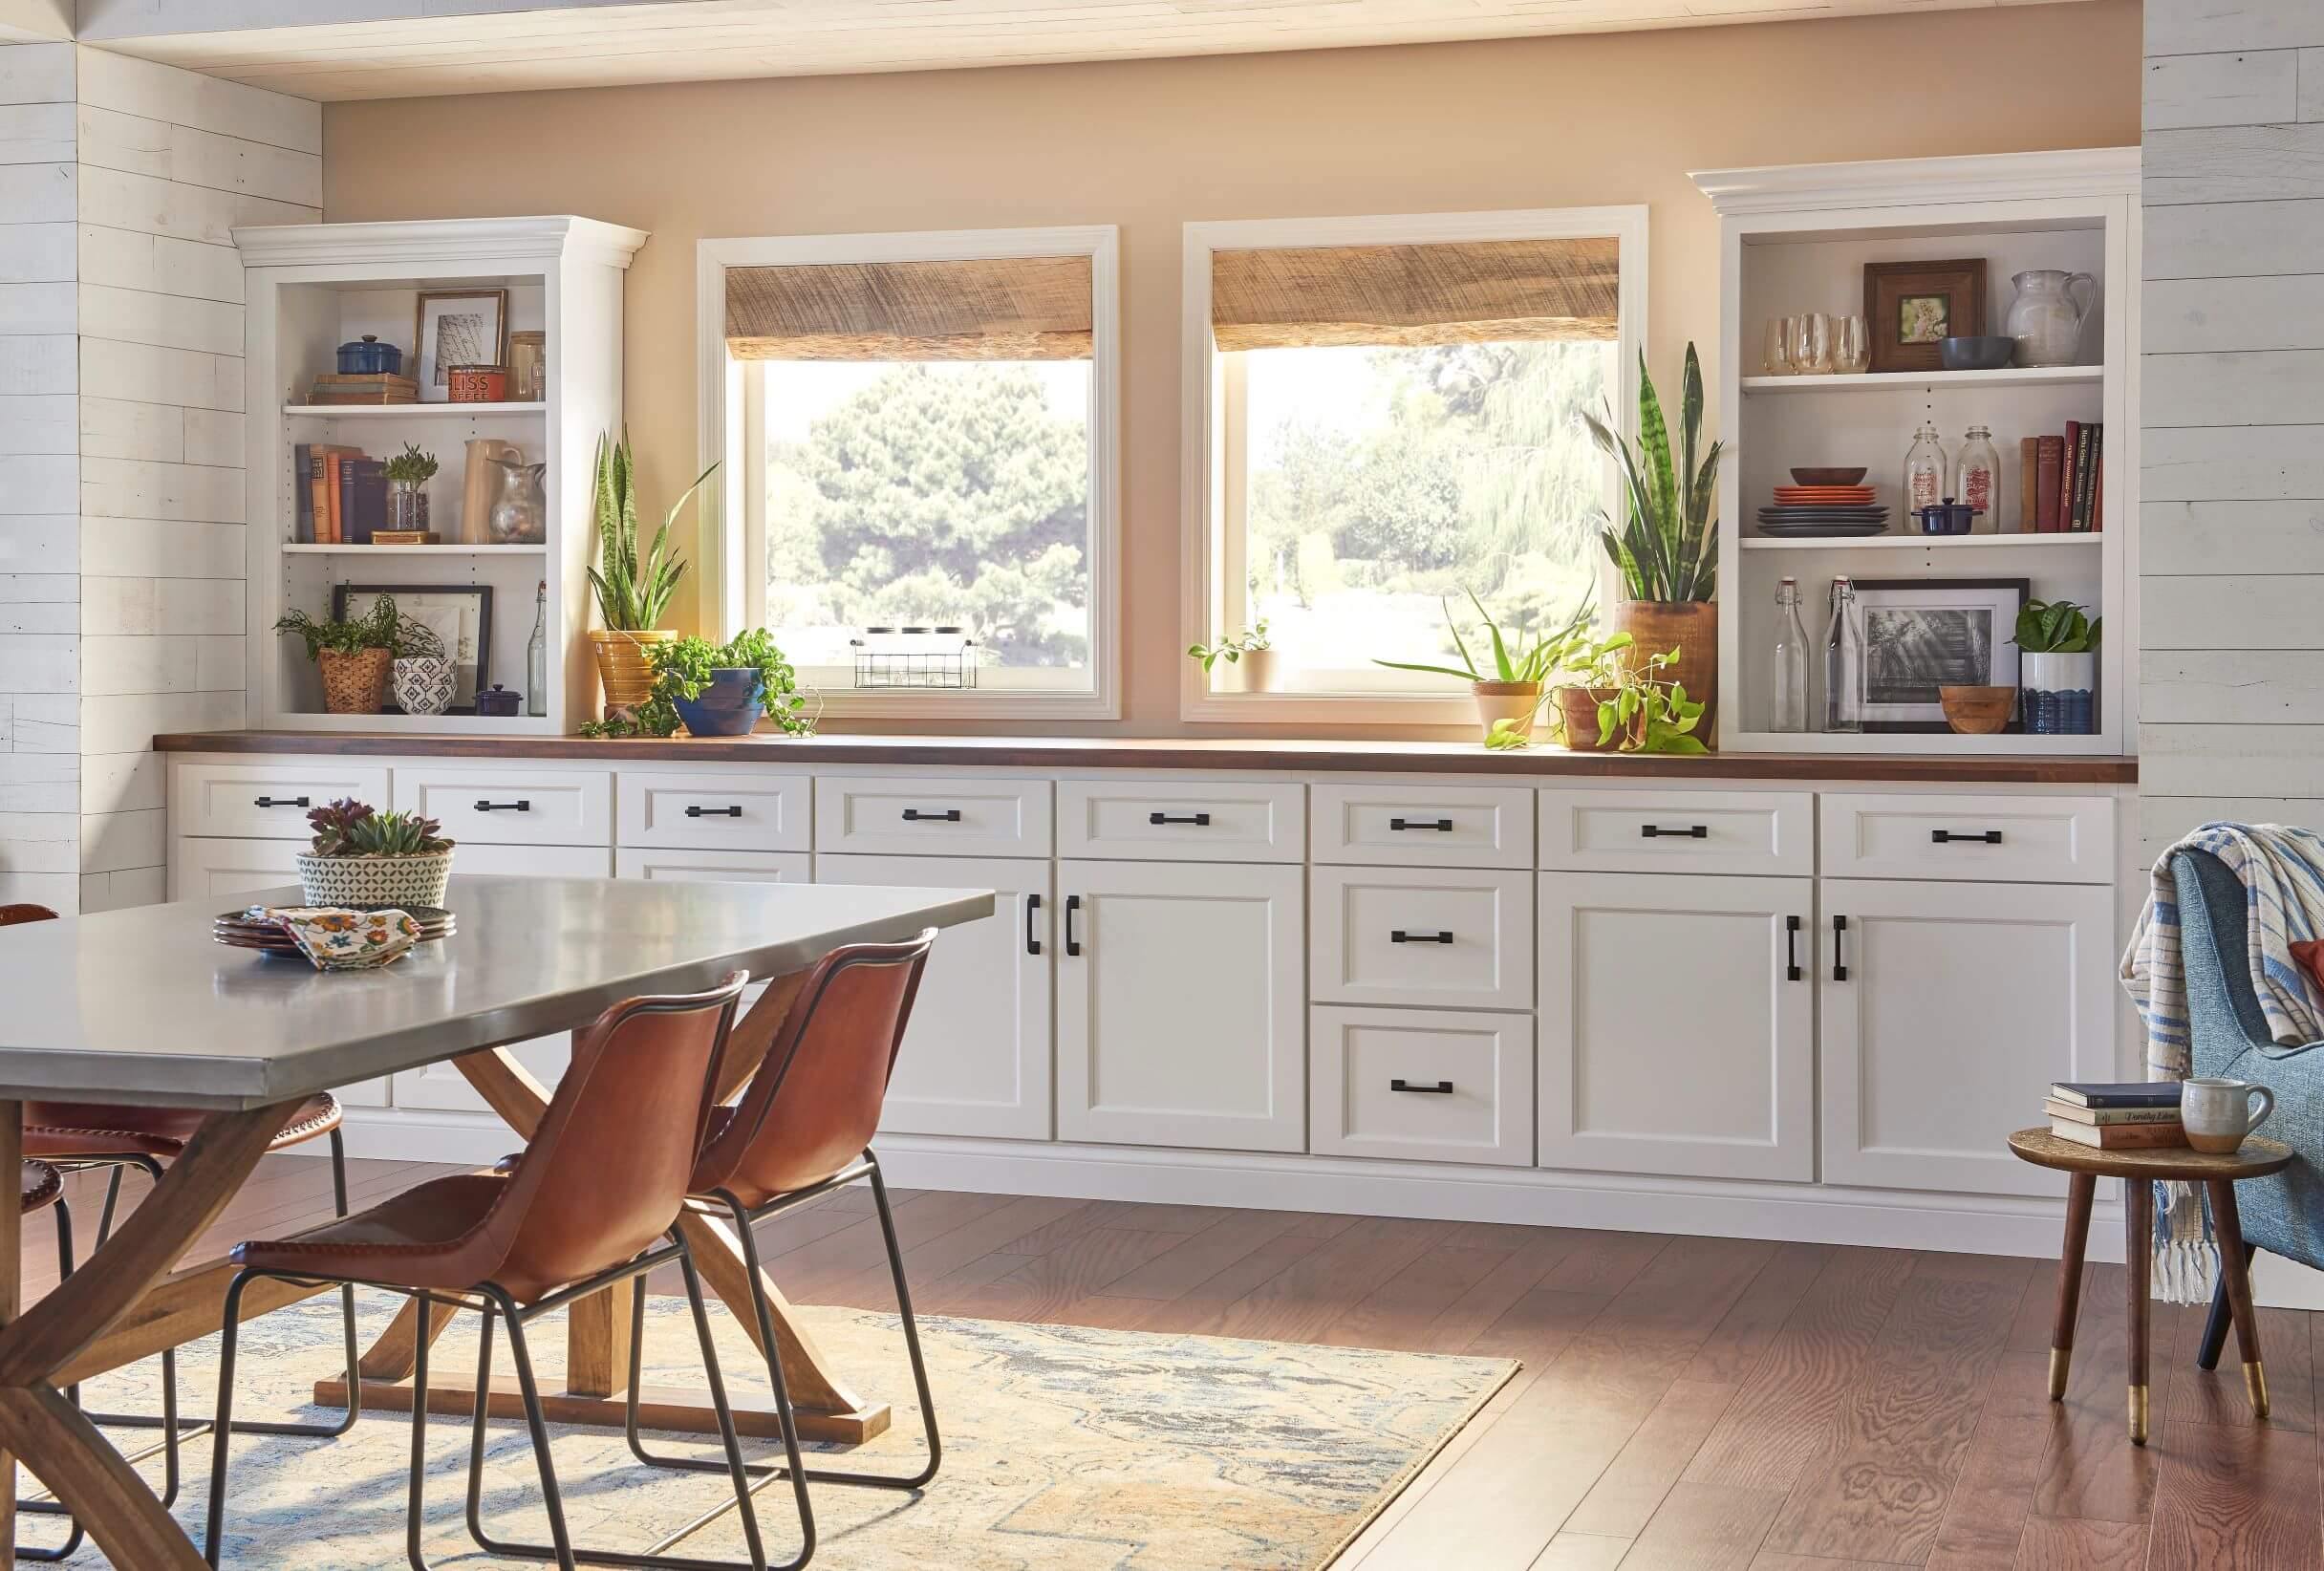 East Coast Quick Kitchen Cabinets can be installed in kitchens, bathrooms, laundry rooms, and basements